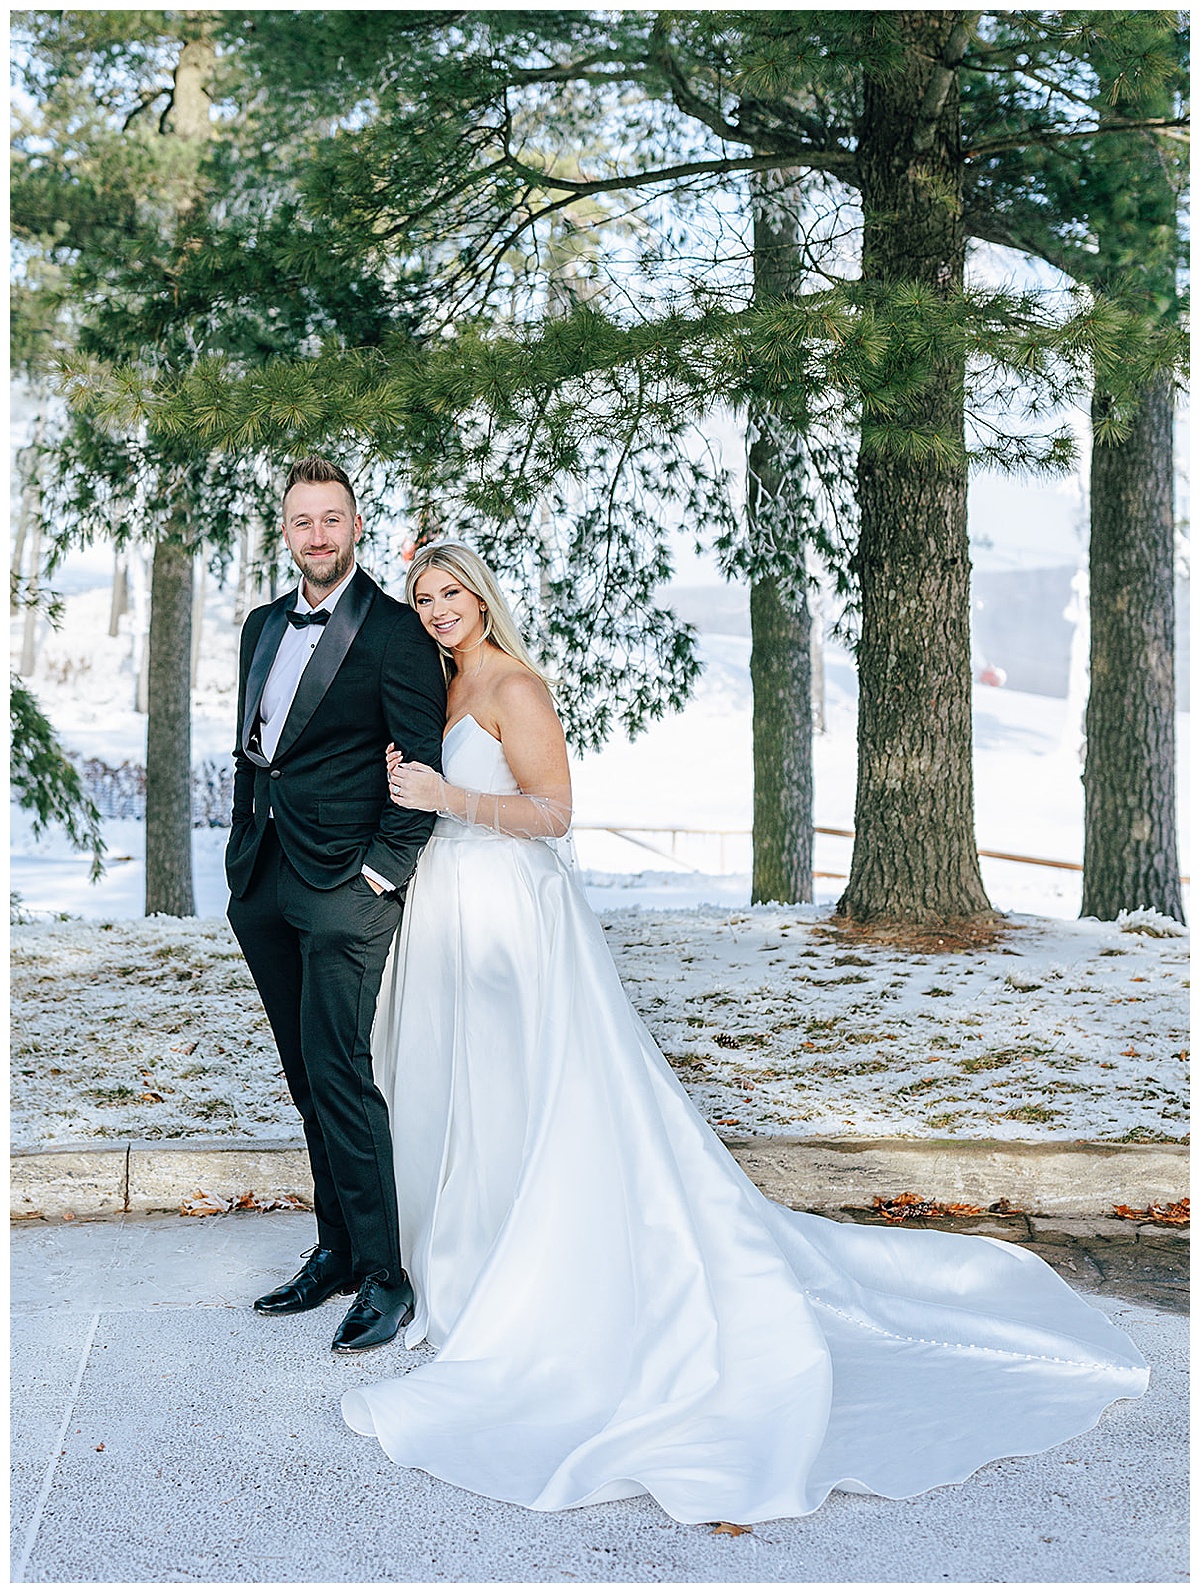 couple cuddle in close together for Snowy Winter Wonderland WeddingC